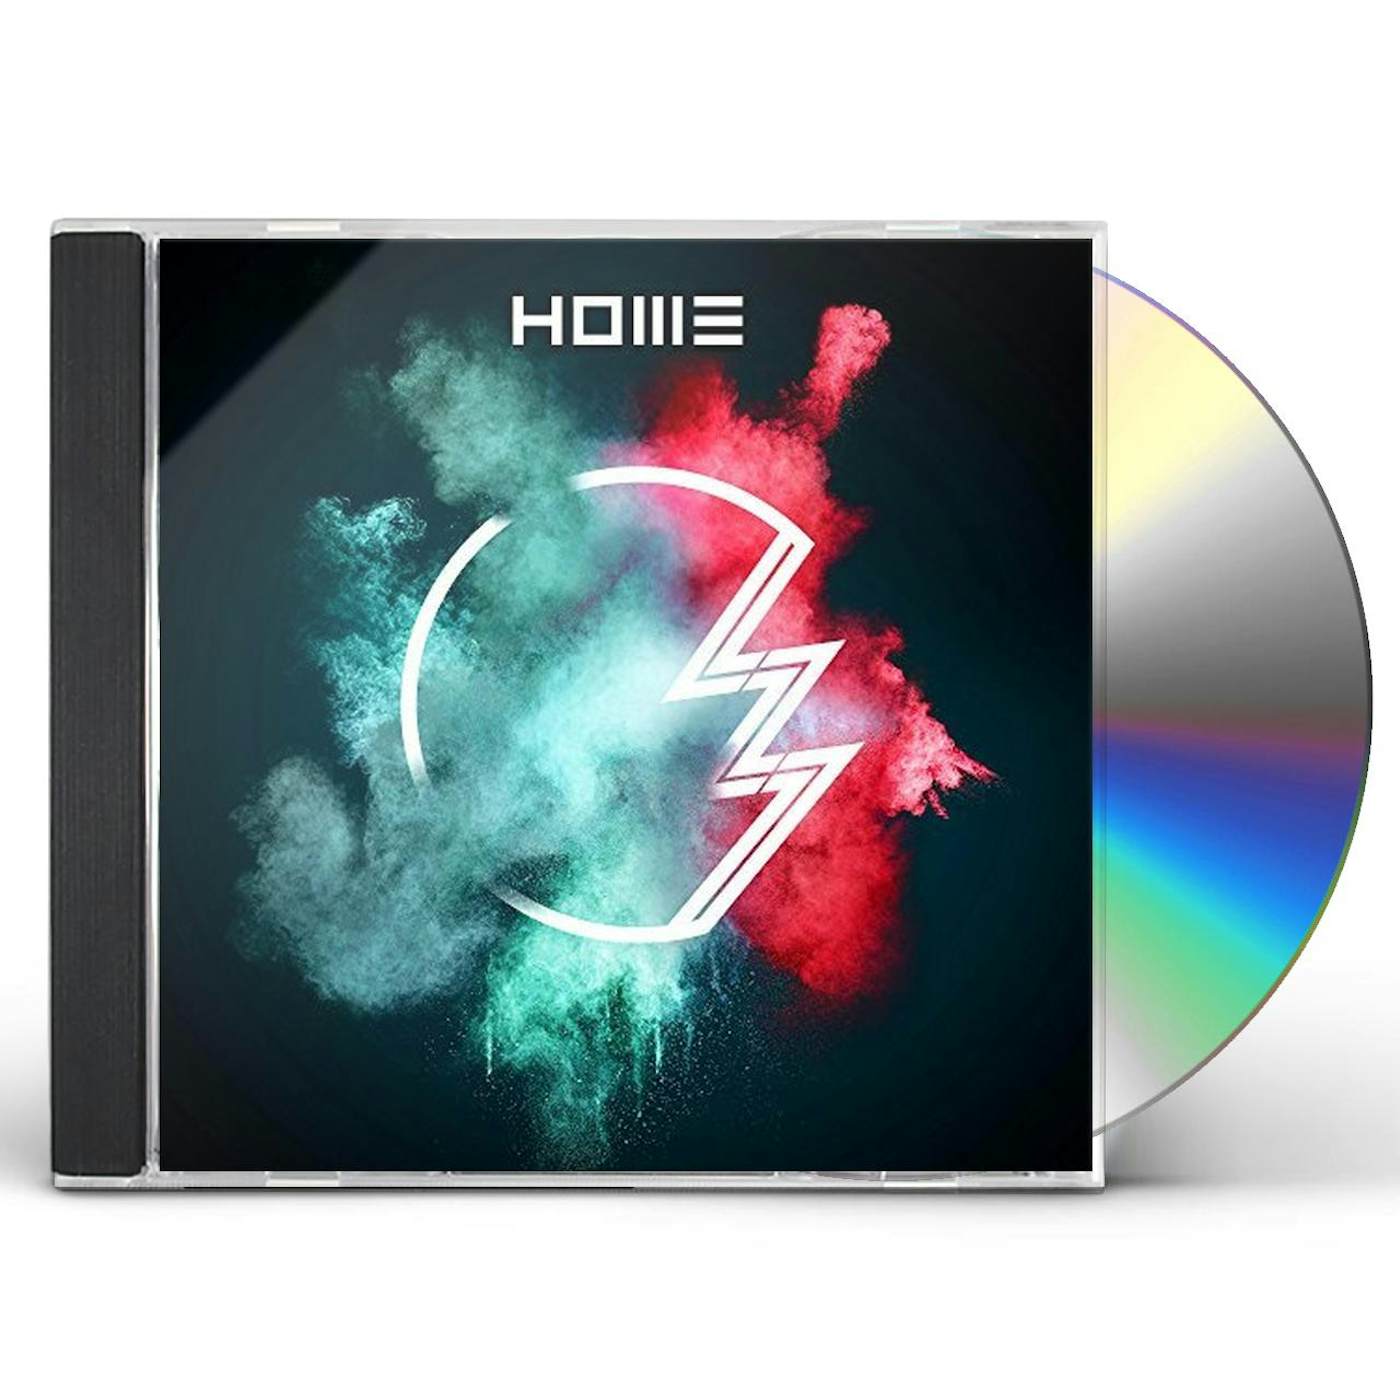 LZ7 HOME CD